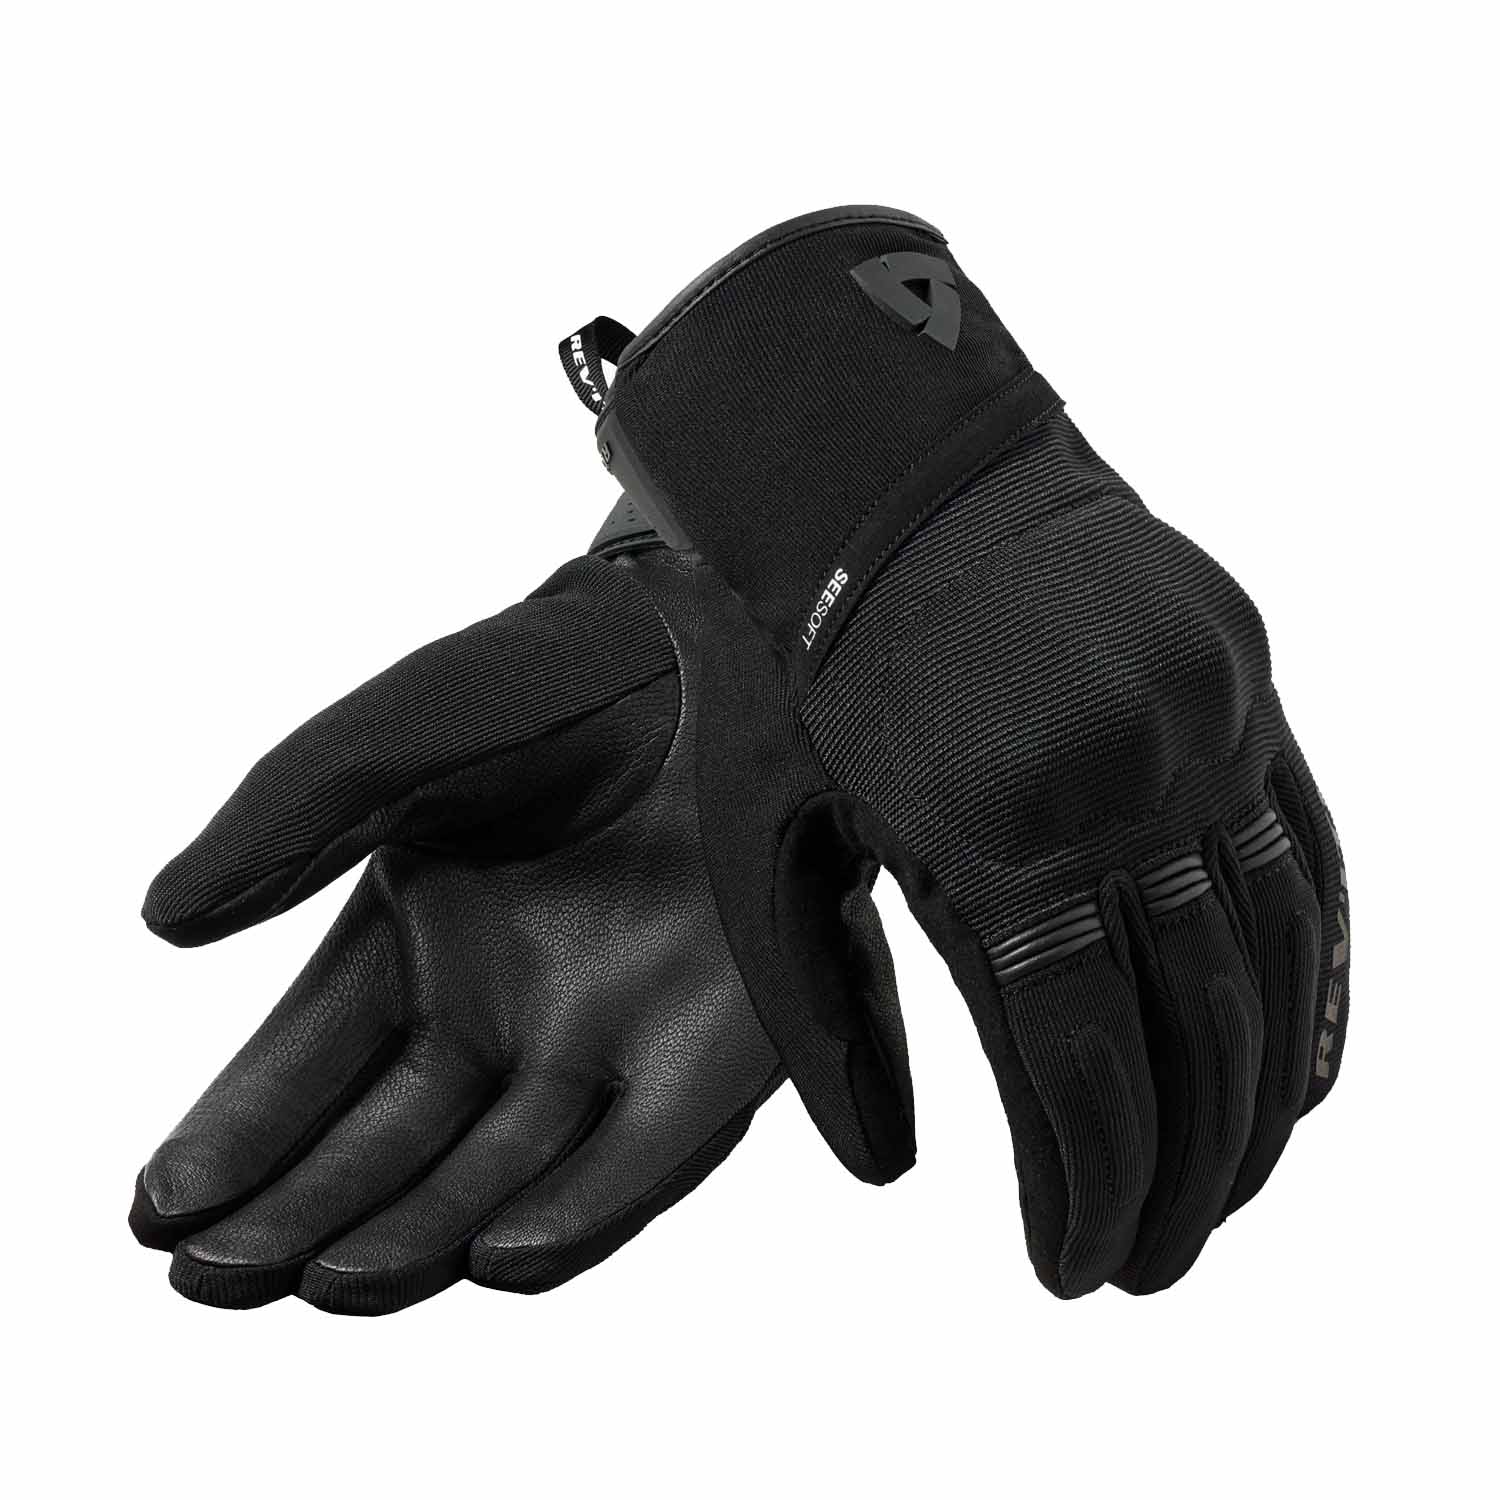 Image of REV'IT! Mosca 2 H2O Gloves Black Size XS ID 8700001383233